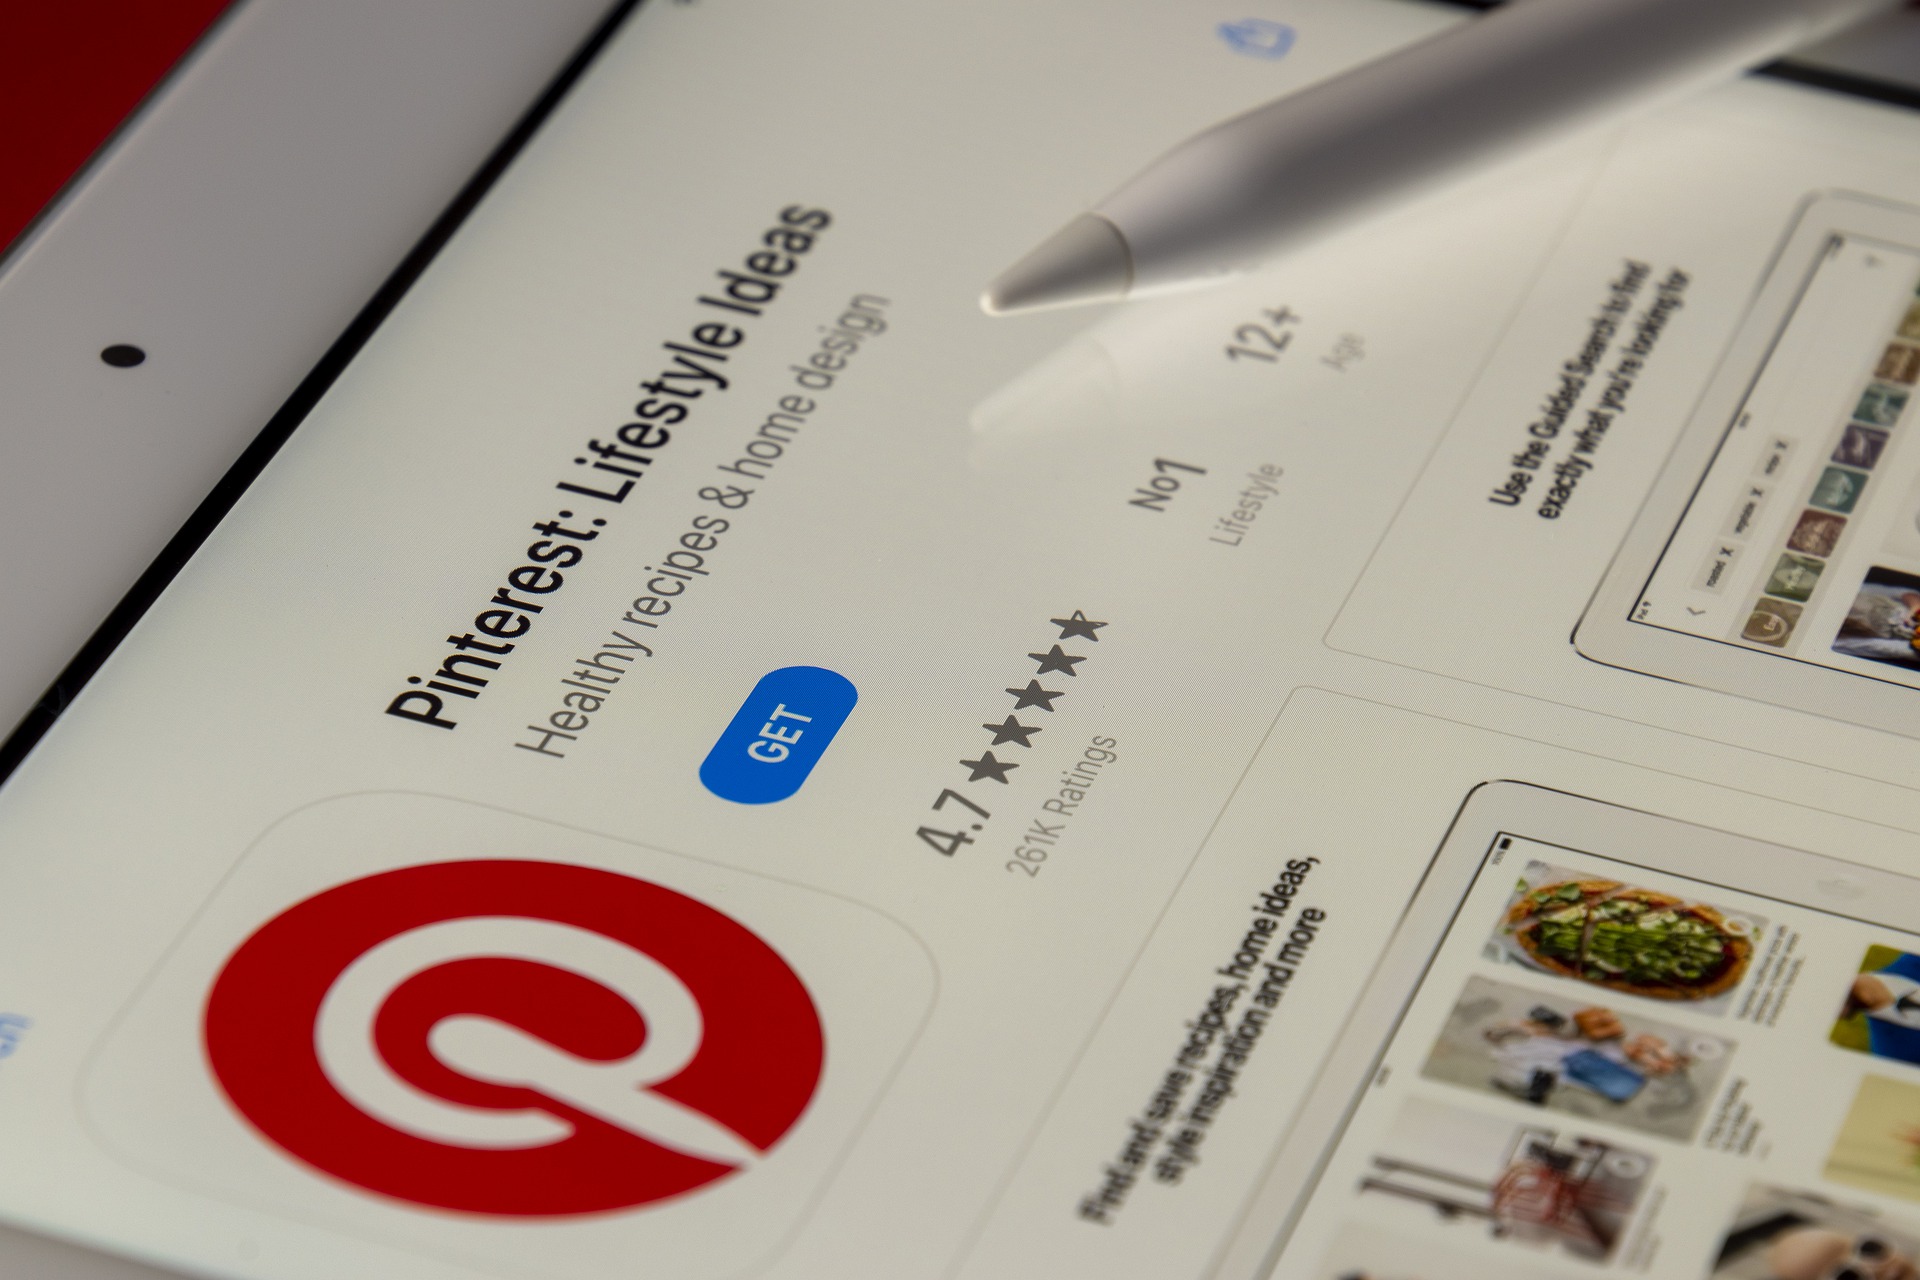 How To Use Pinterest For Marketing